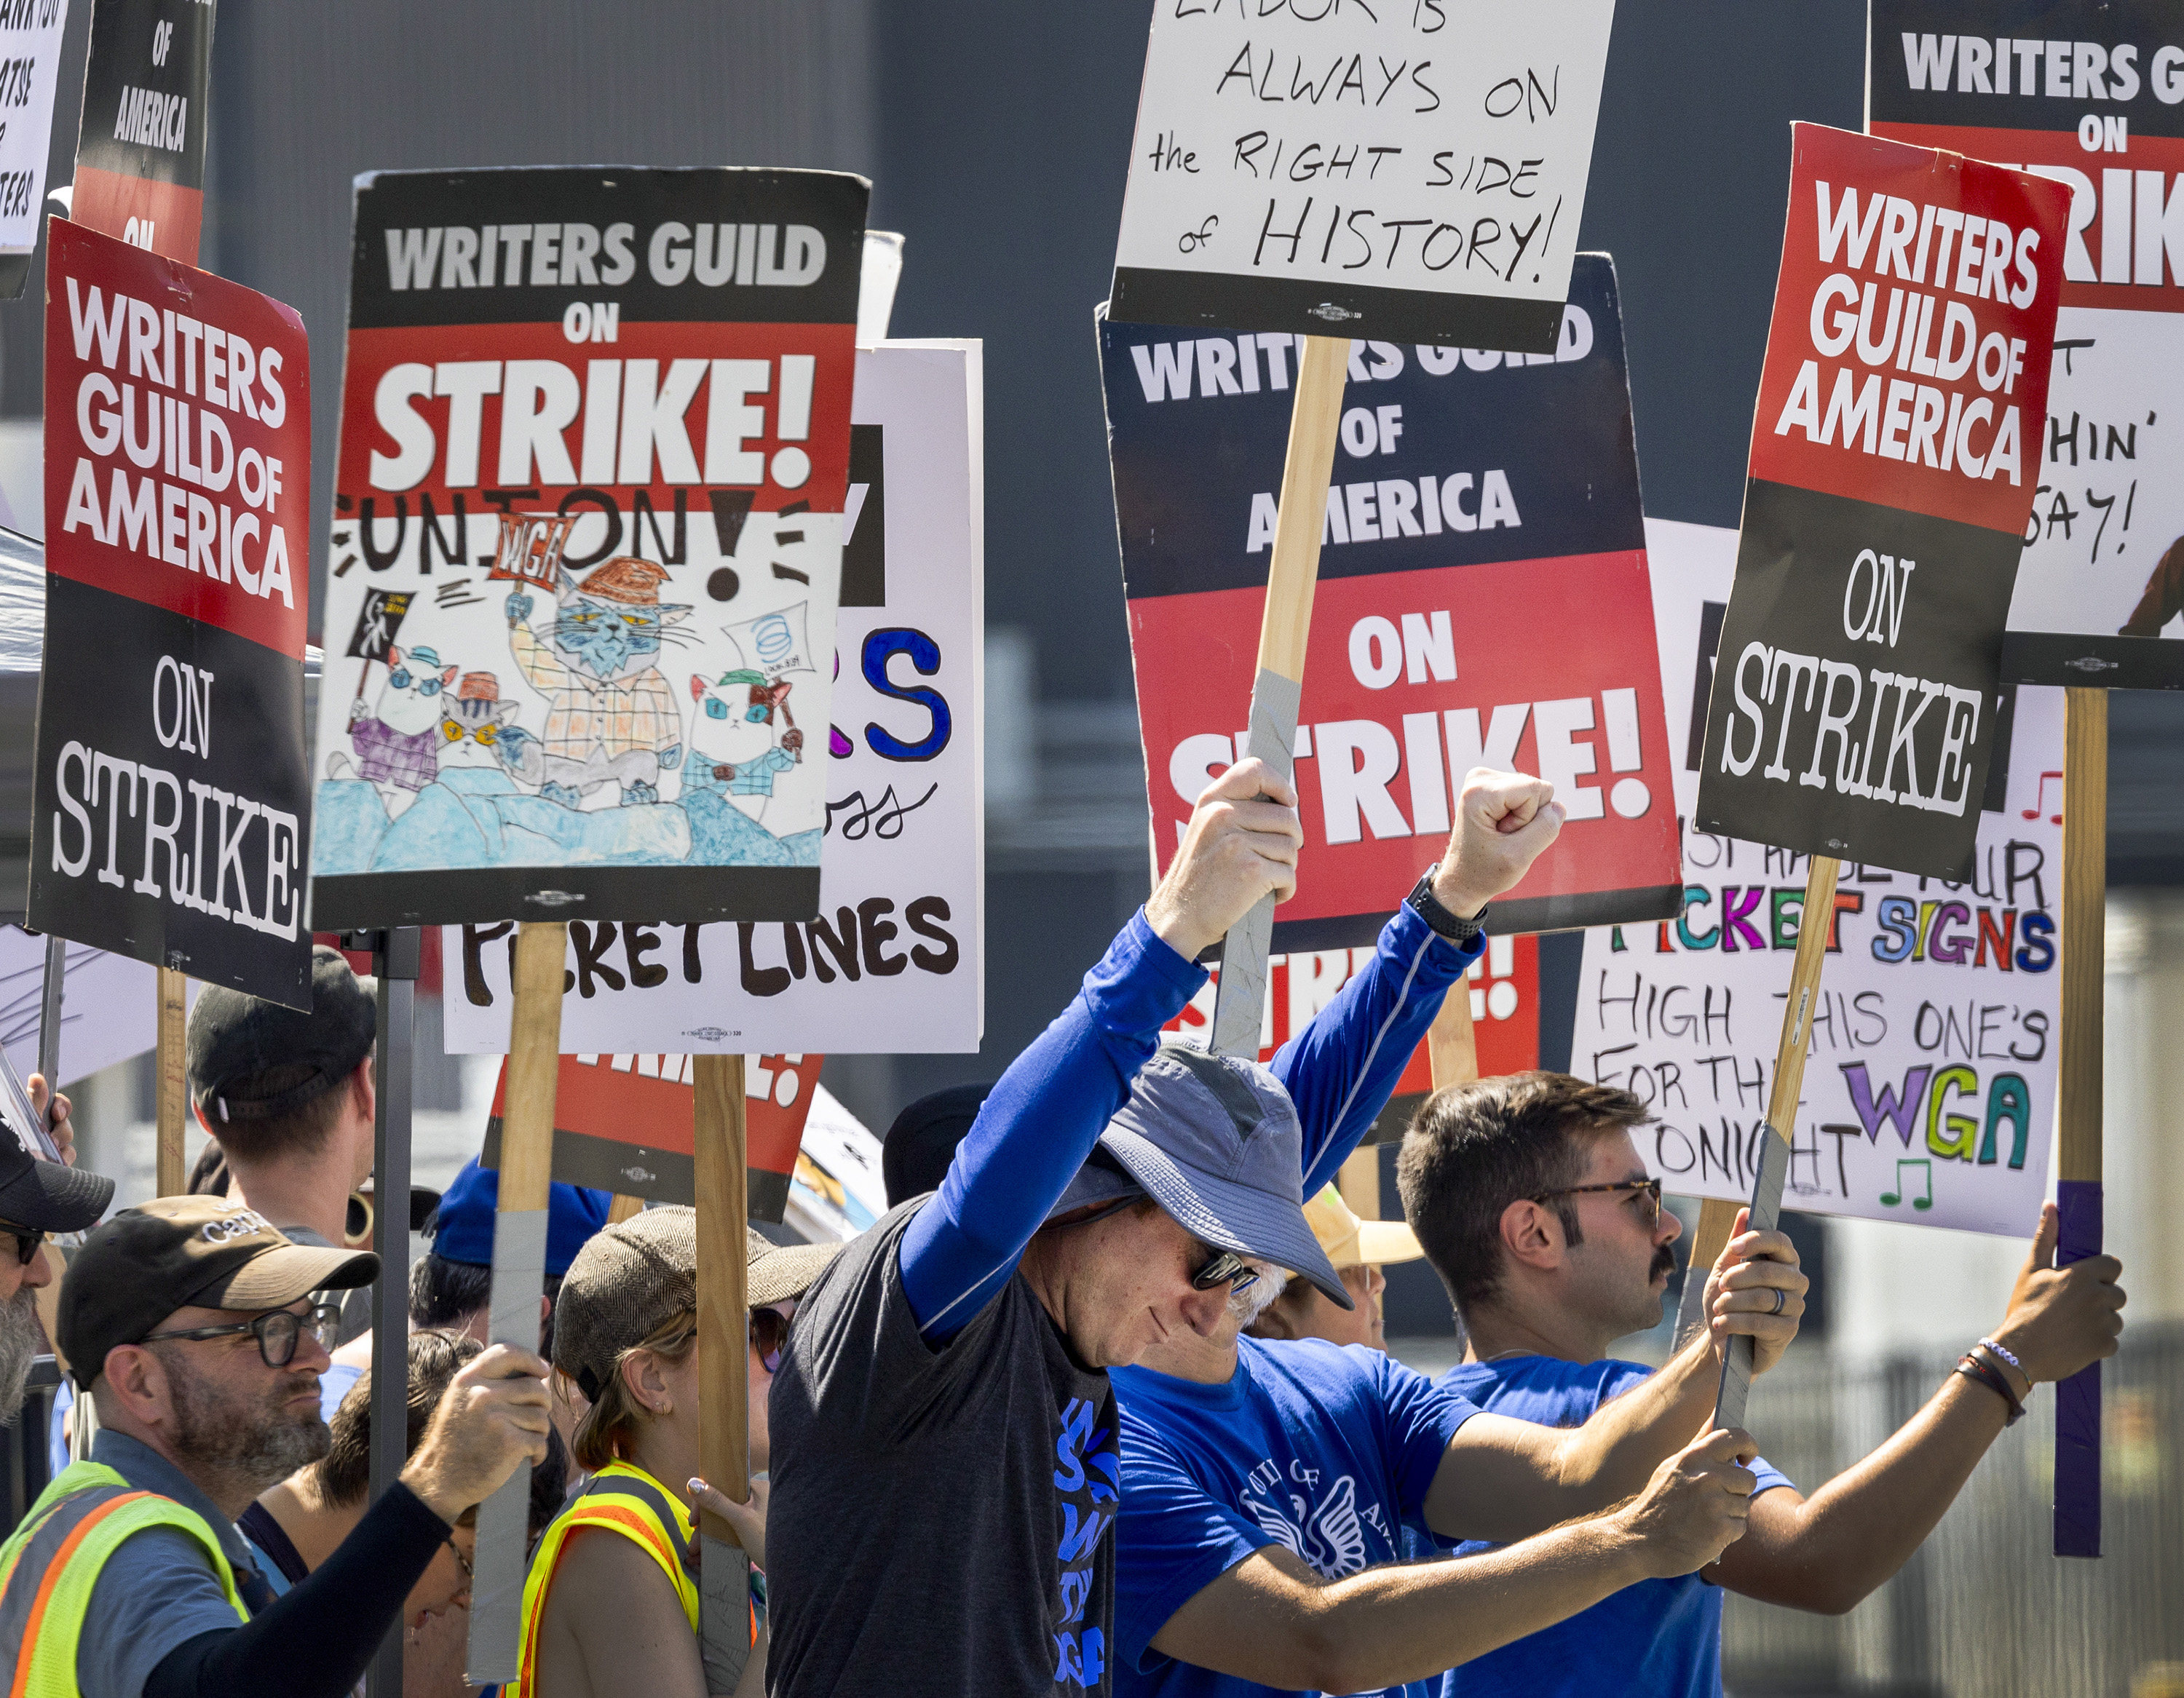 Members of the Writers Guild of America picket in front of CBS Television City in Los Angeles on September 24. With a growing number of jobs threatened by AI automation, entrepreneurial education and workers possessing a variety of skills are more important than ever. Photo: TNS